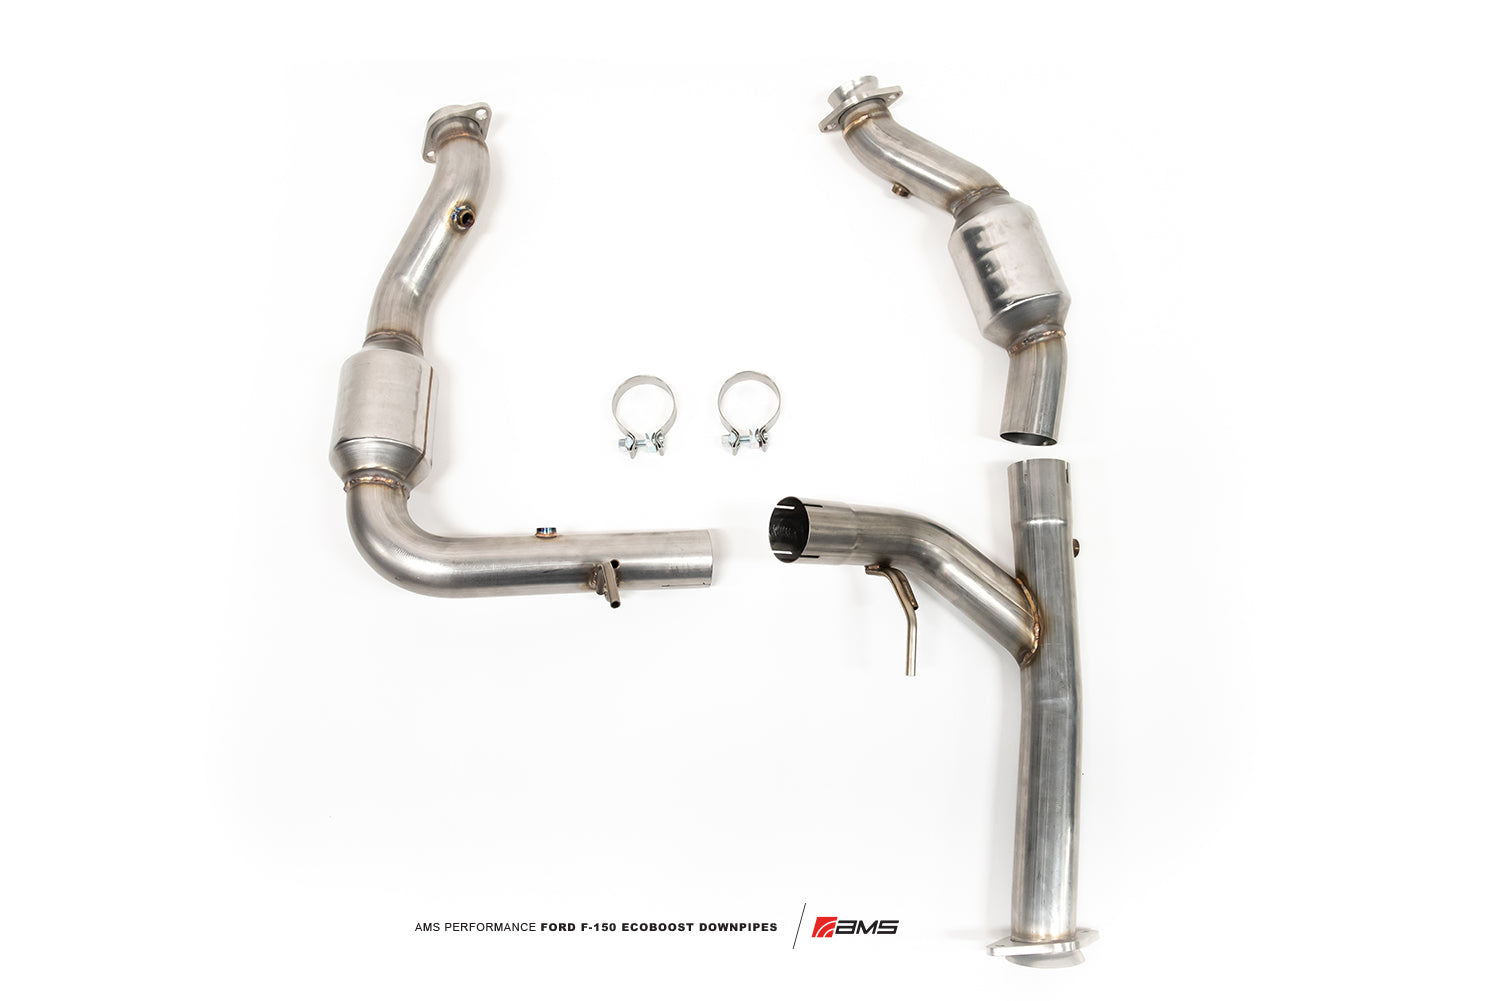 '15-20 Ford F150 3.5L Ecoboost Street Downpipes AMS parts